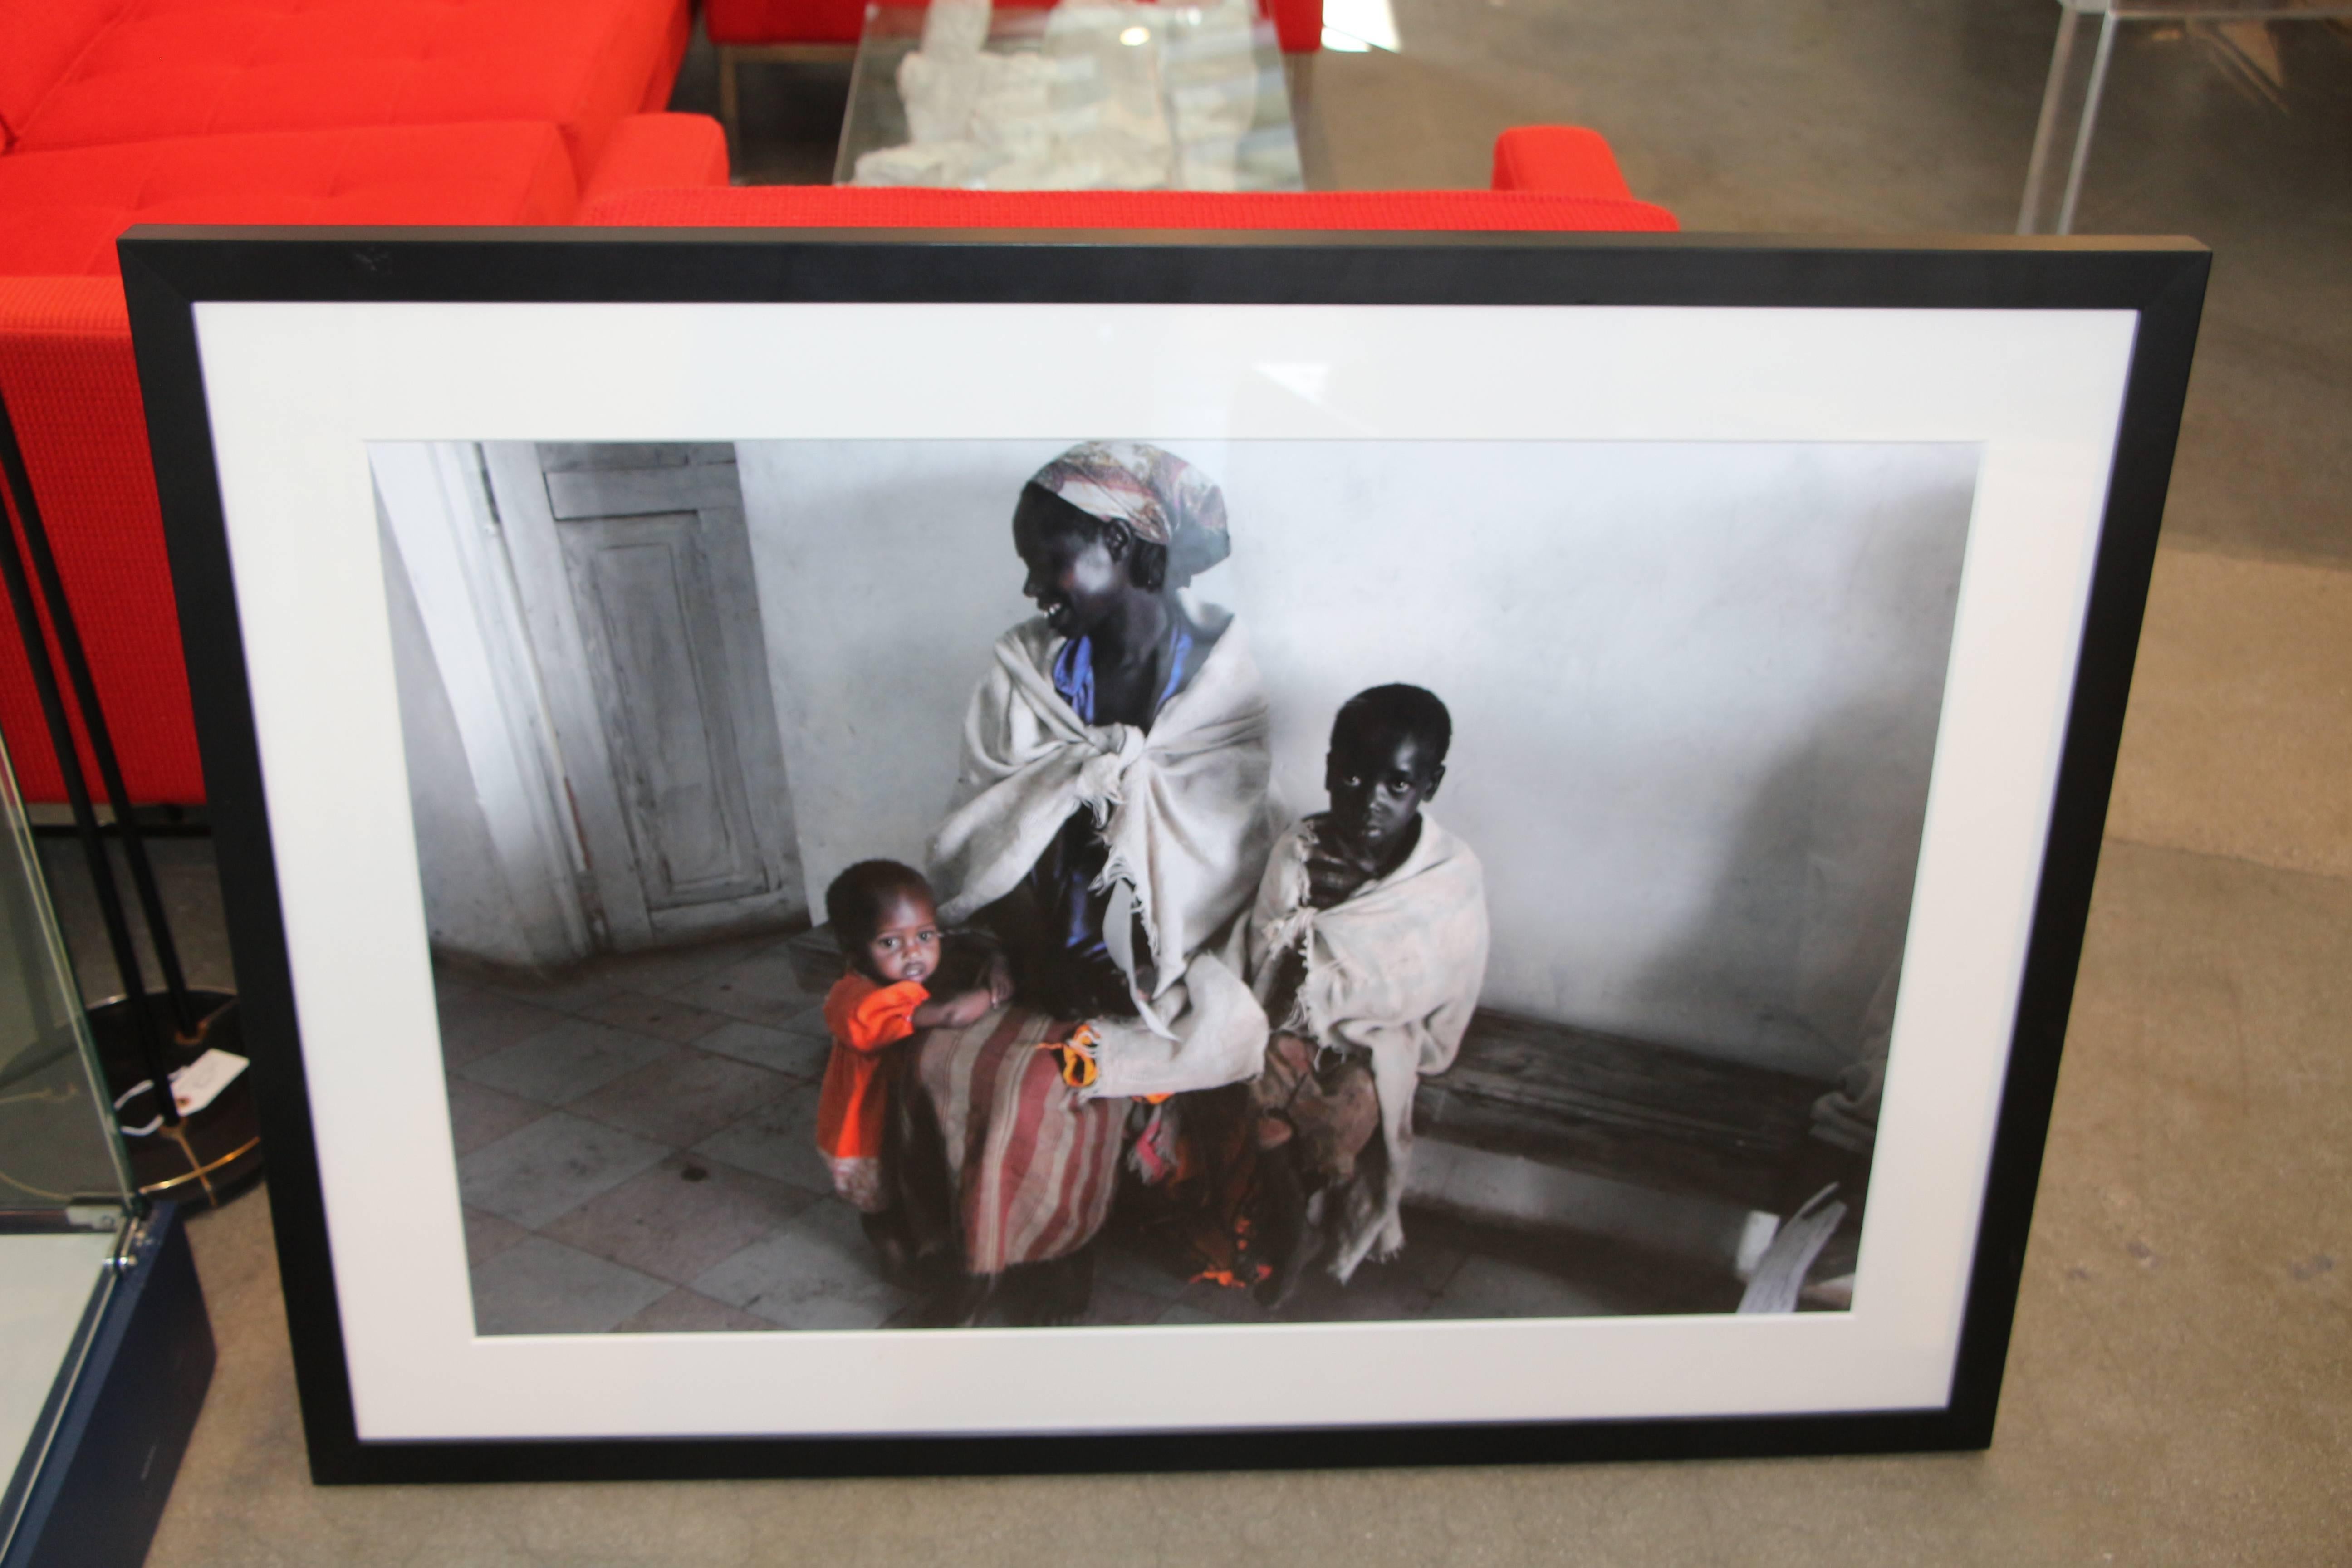 A striking photograph of a mother and children in Kenya by an unidentified artist.  Titled. dated and signed 2009 Kenya. Medium unidentified, possibly an archival inkjet print, nicely framed and matted. Image is slightly out of focus, whether that